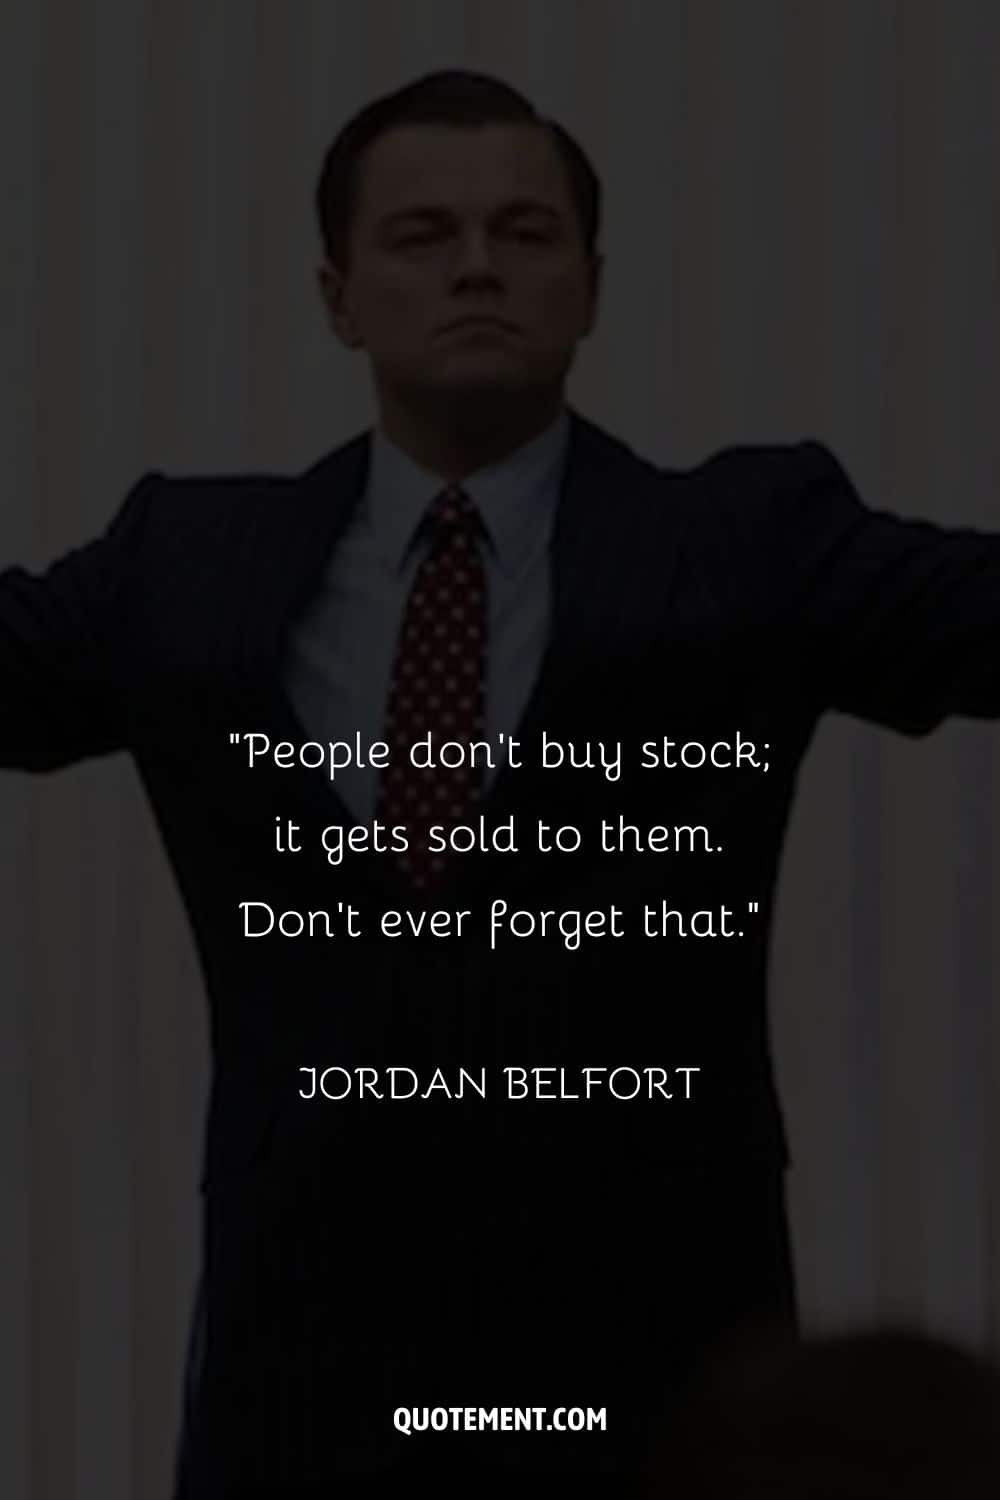 Confident DiCaprio representing wolf of wall street money quotes
